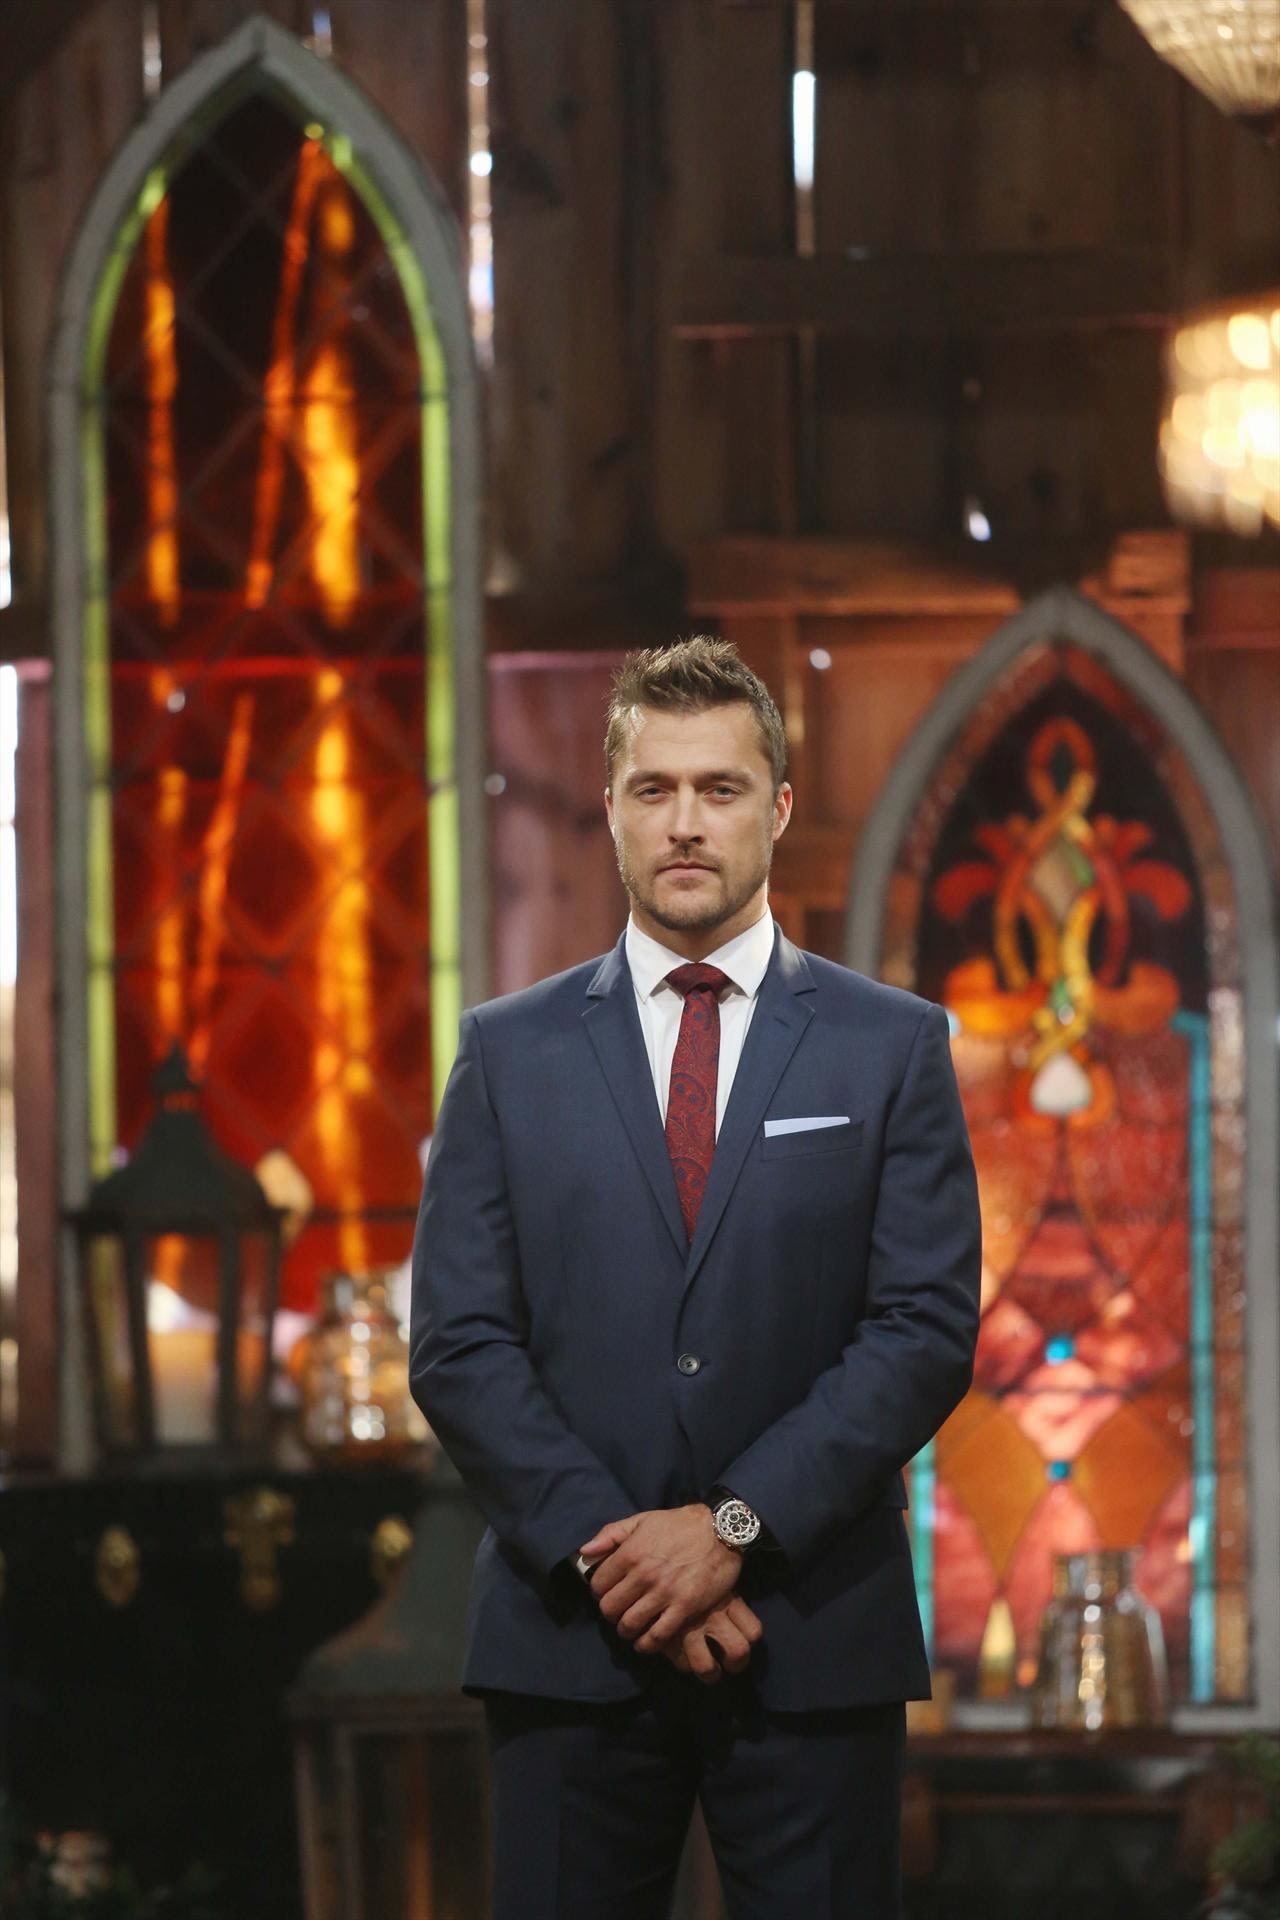 Iowa farmer Chris Soules, star of the ABC reality series "The Bachelor" and one of many men sent home on "The Bachelorette," also danced his way into America's heart -- although not enough to win the show. 